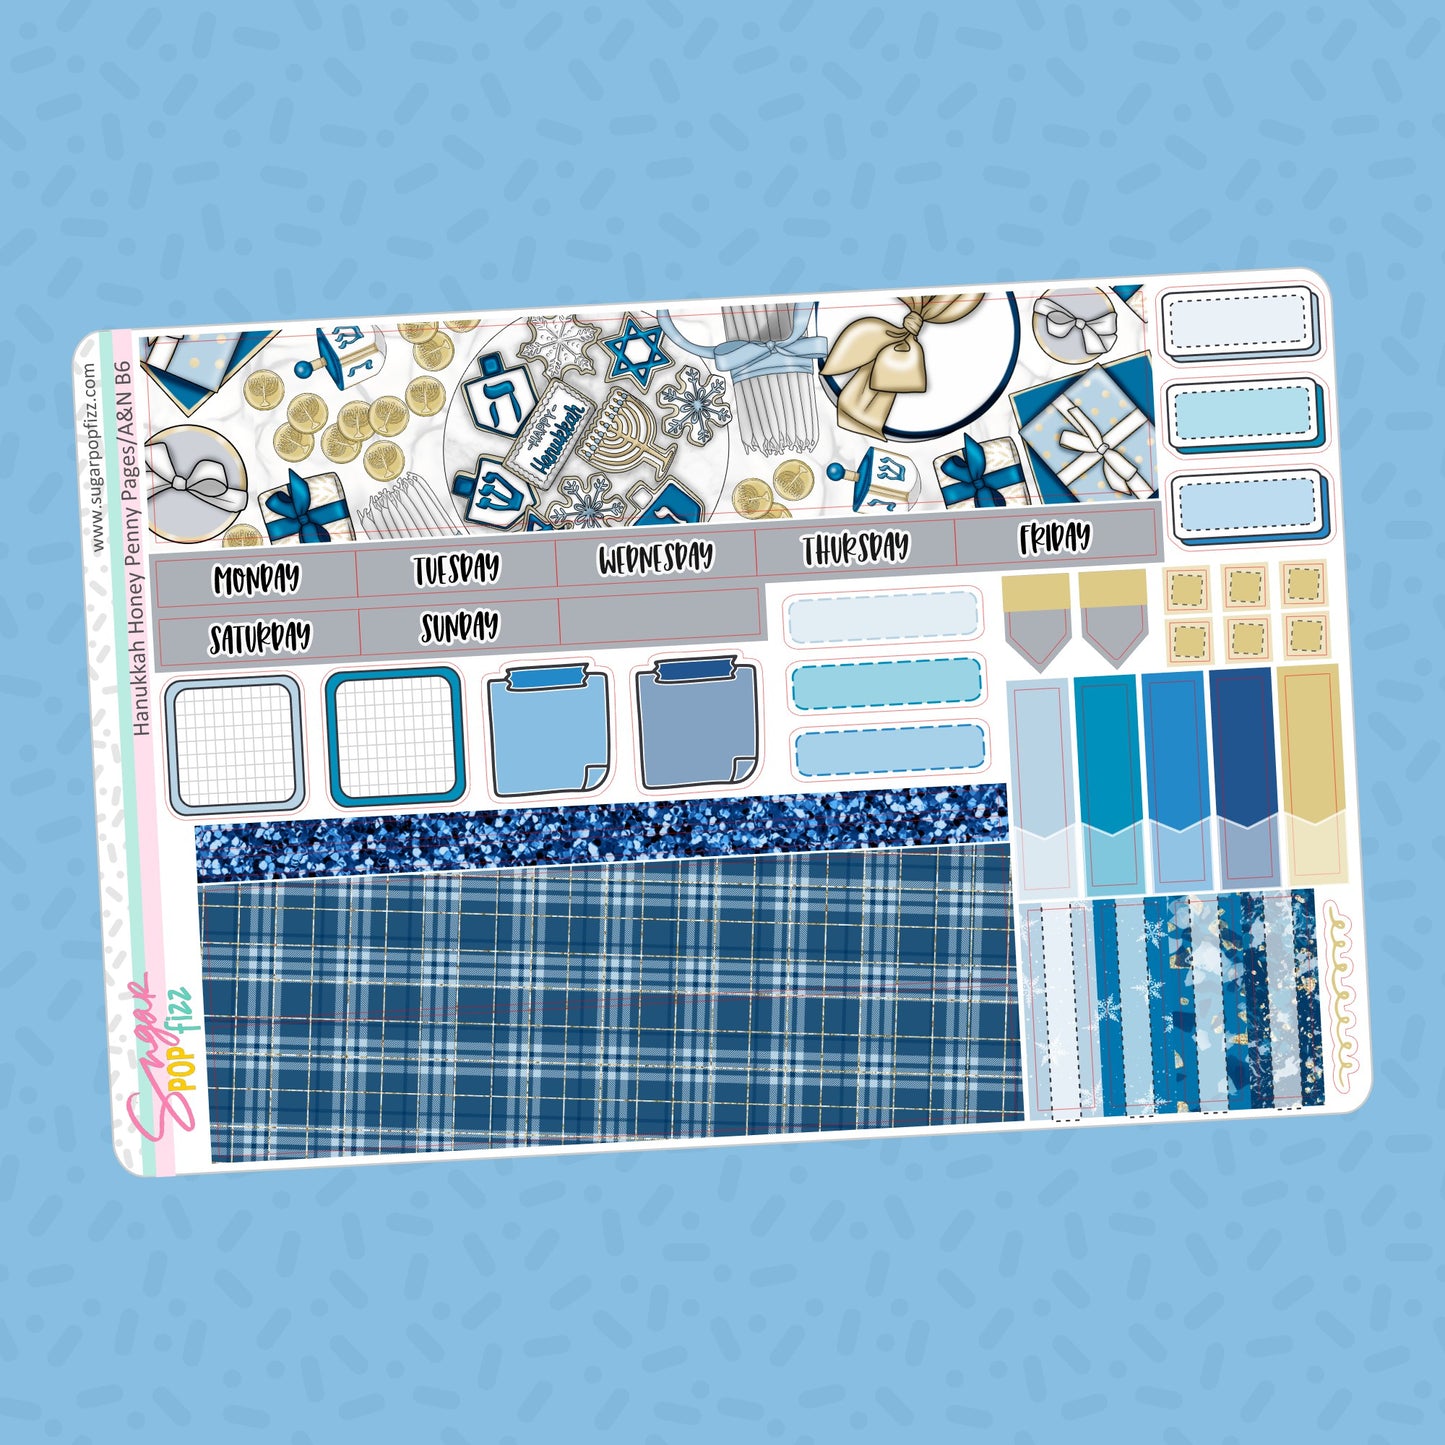 Hanukkah Honey B6 Monthly - Penny Pages/Avalon & Ninth